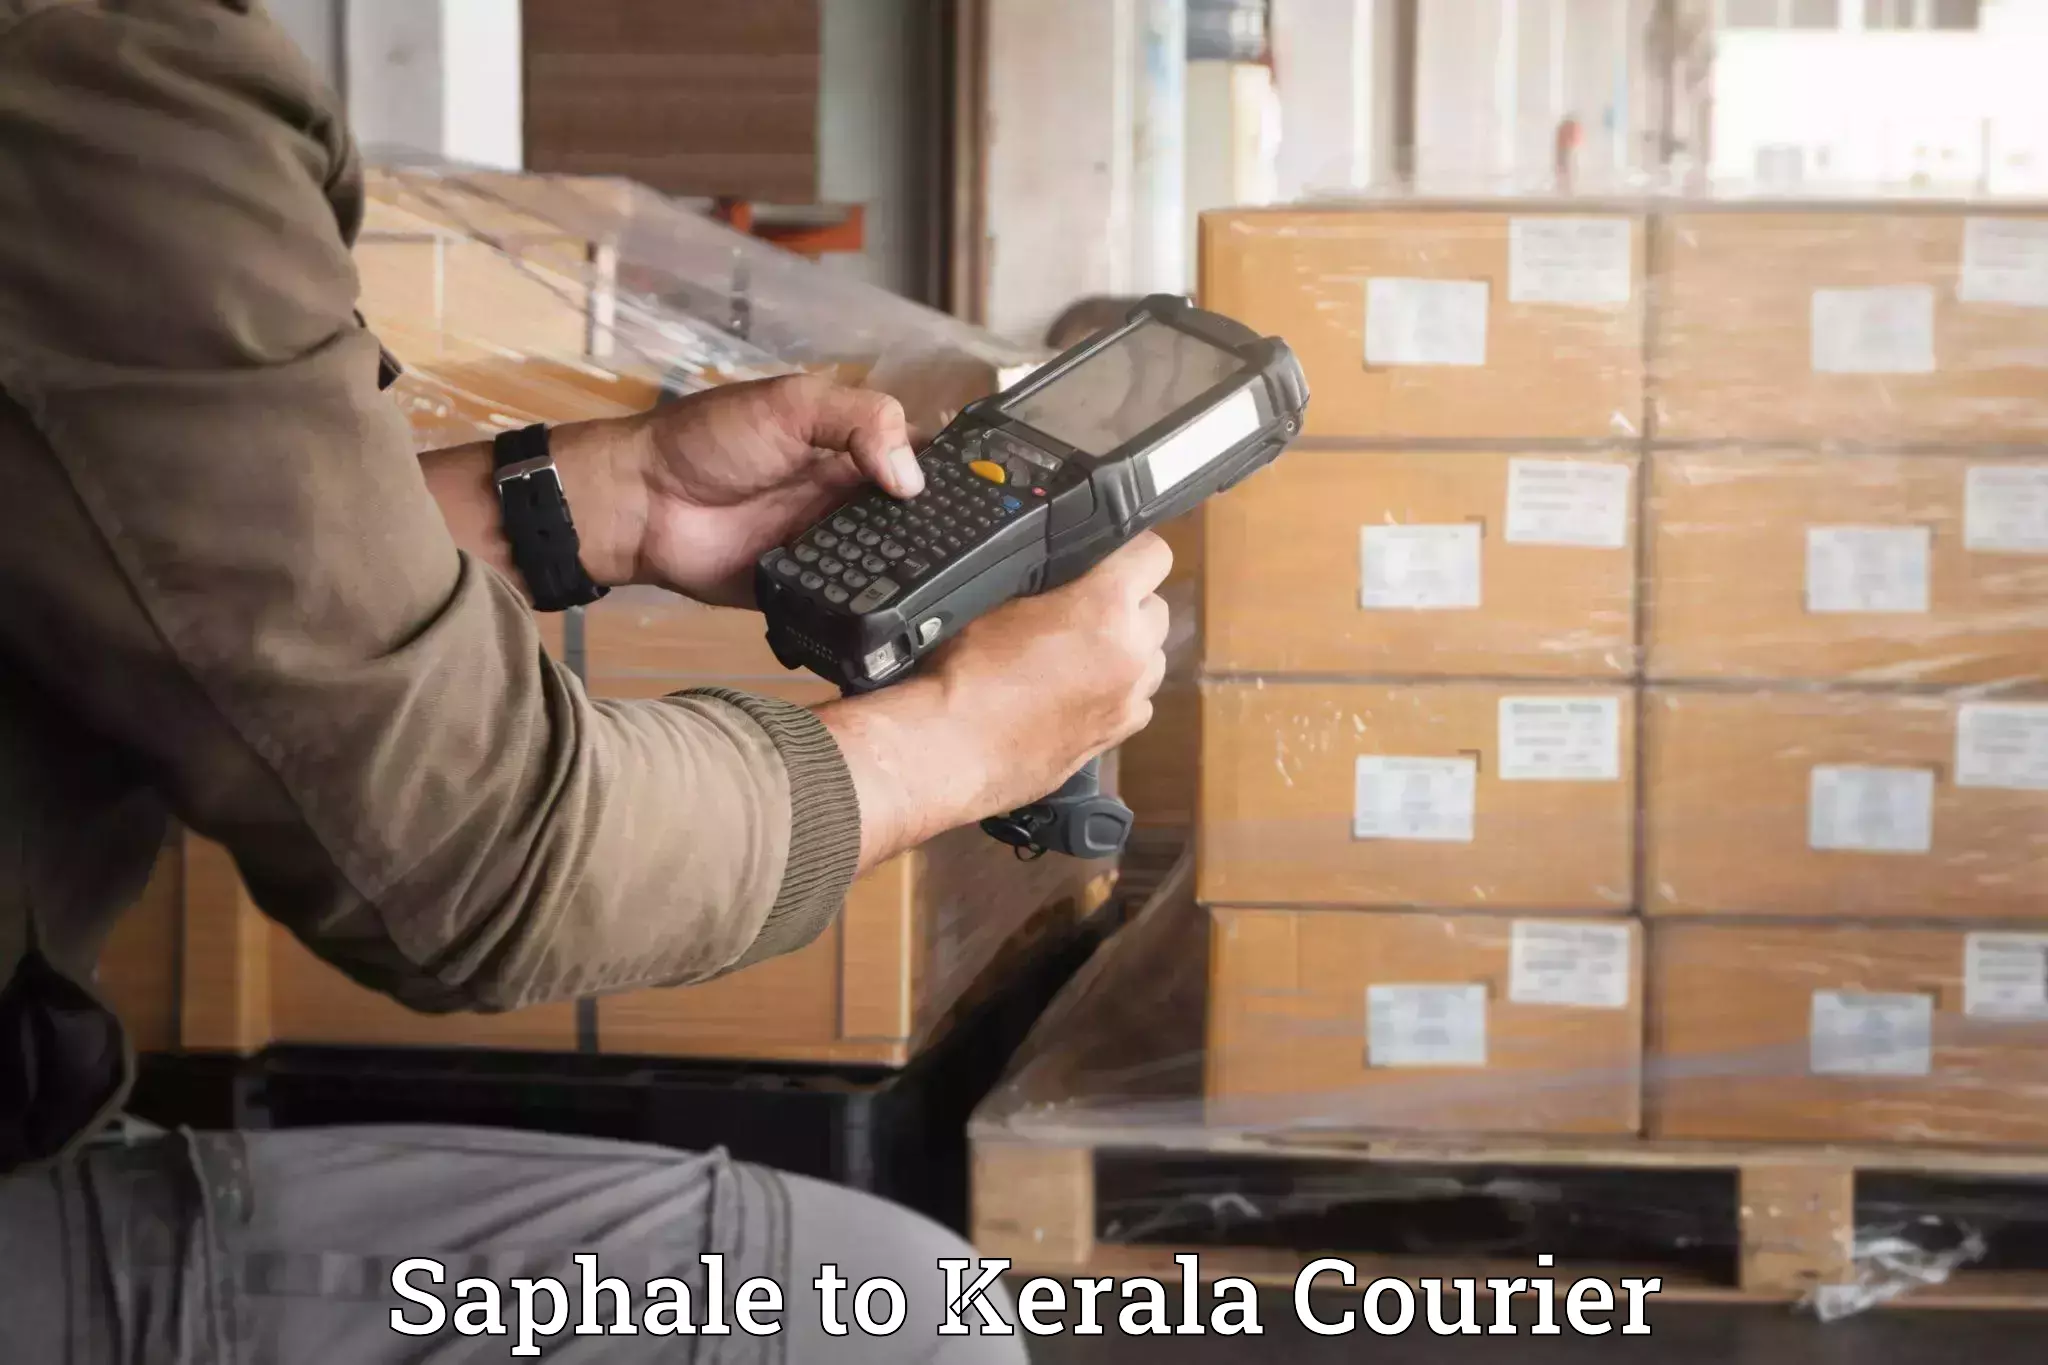 Luggage transport service Saphale to Cochin University of Science and Technology